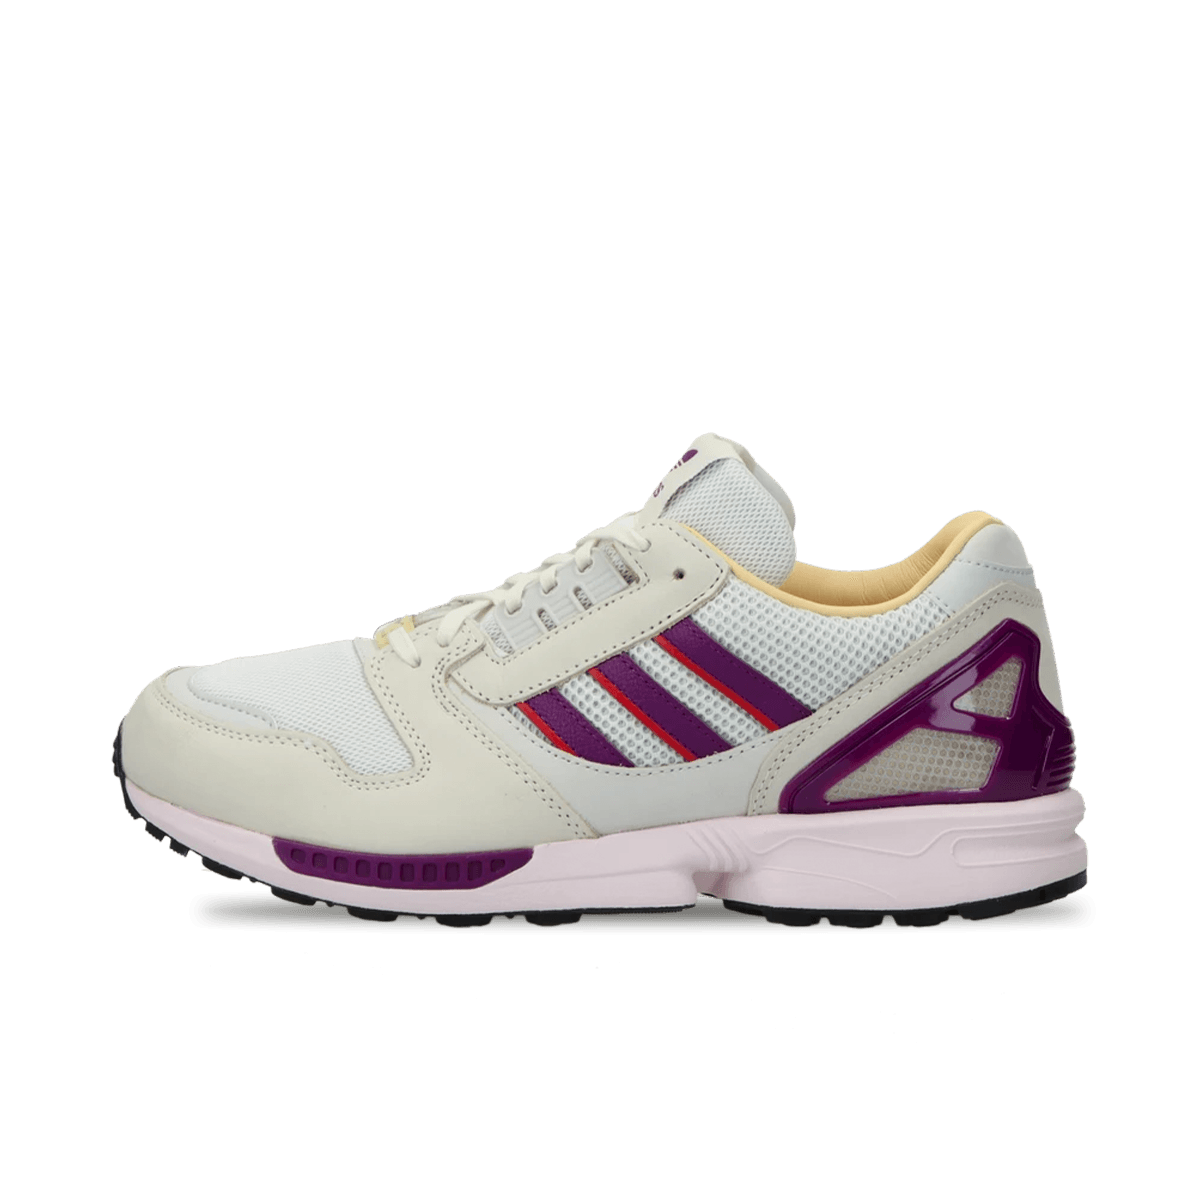 adidas ZX 8000 WMNS 'White Tint' | IE2963 | The Drop Date